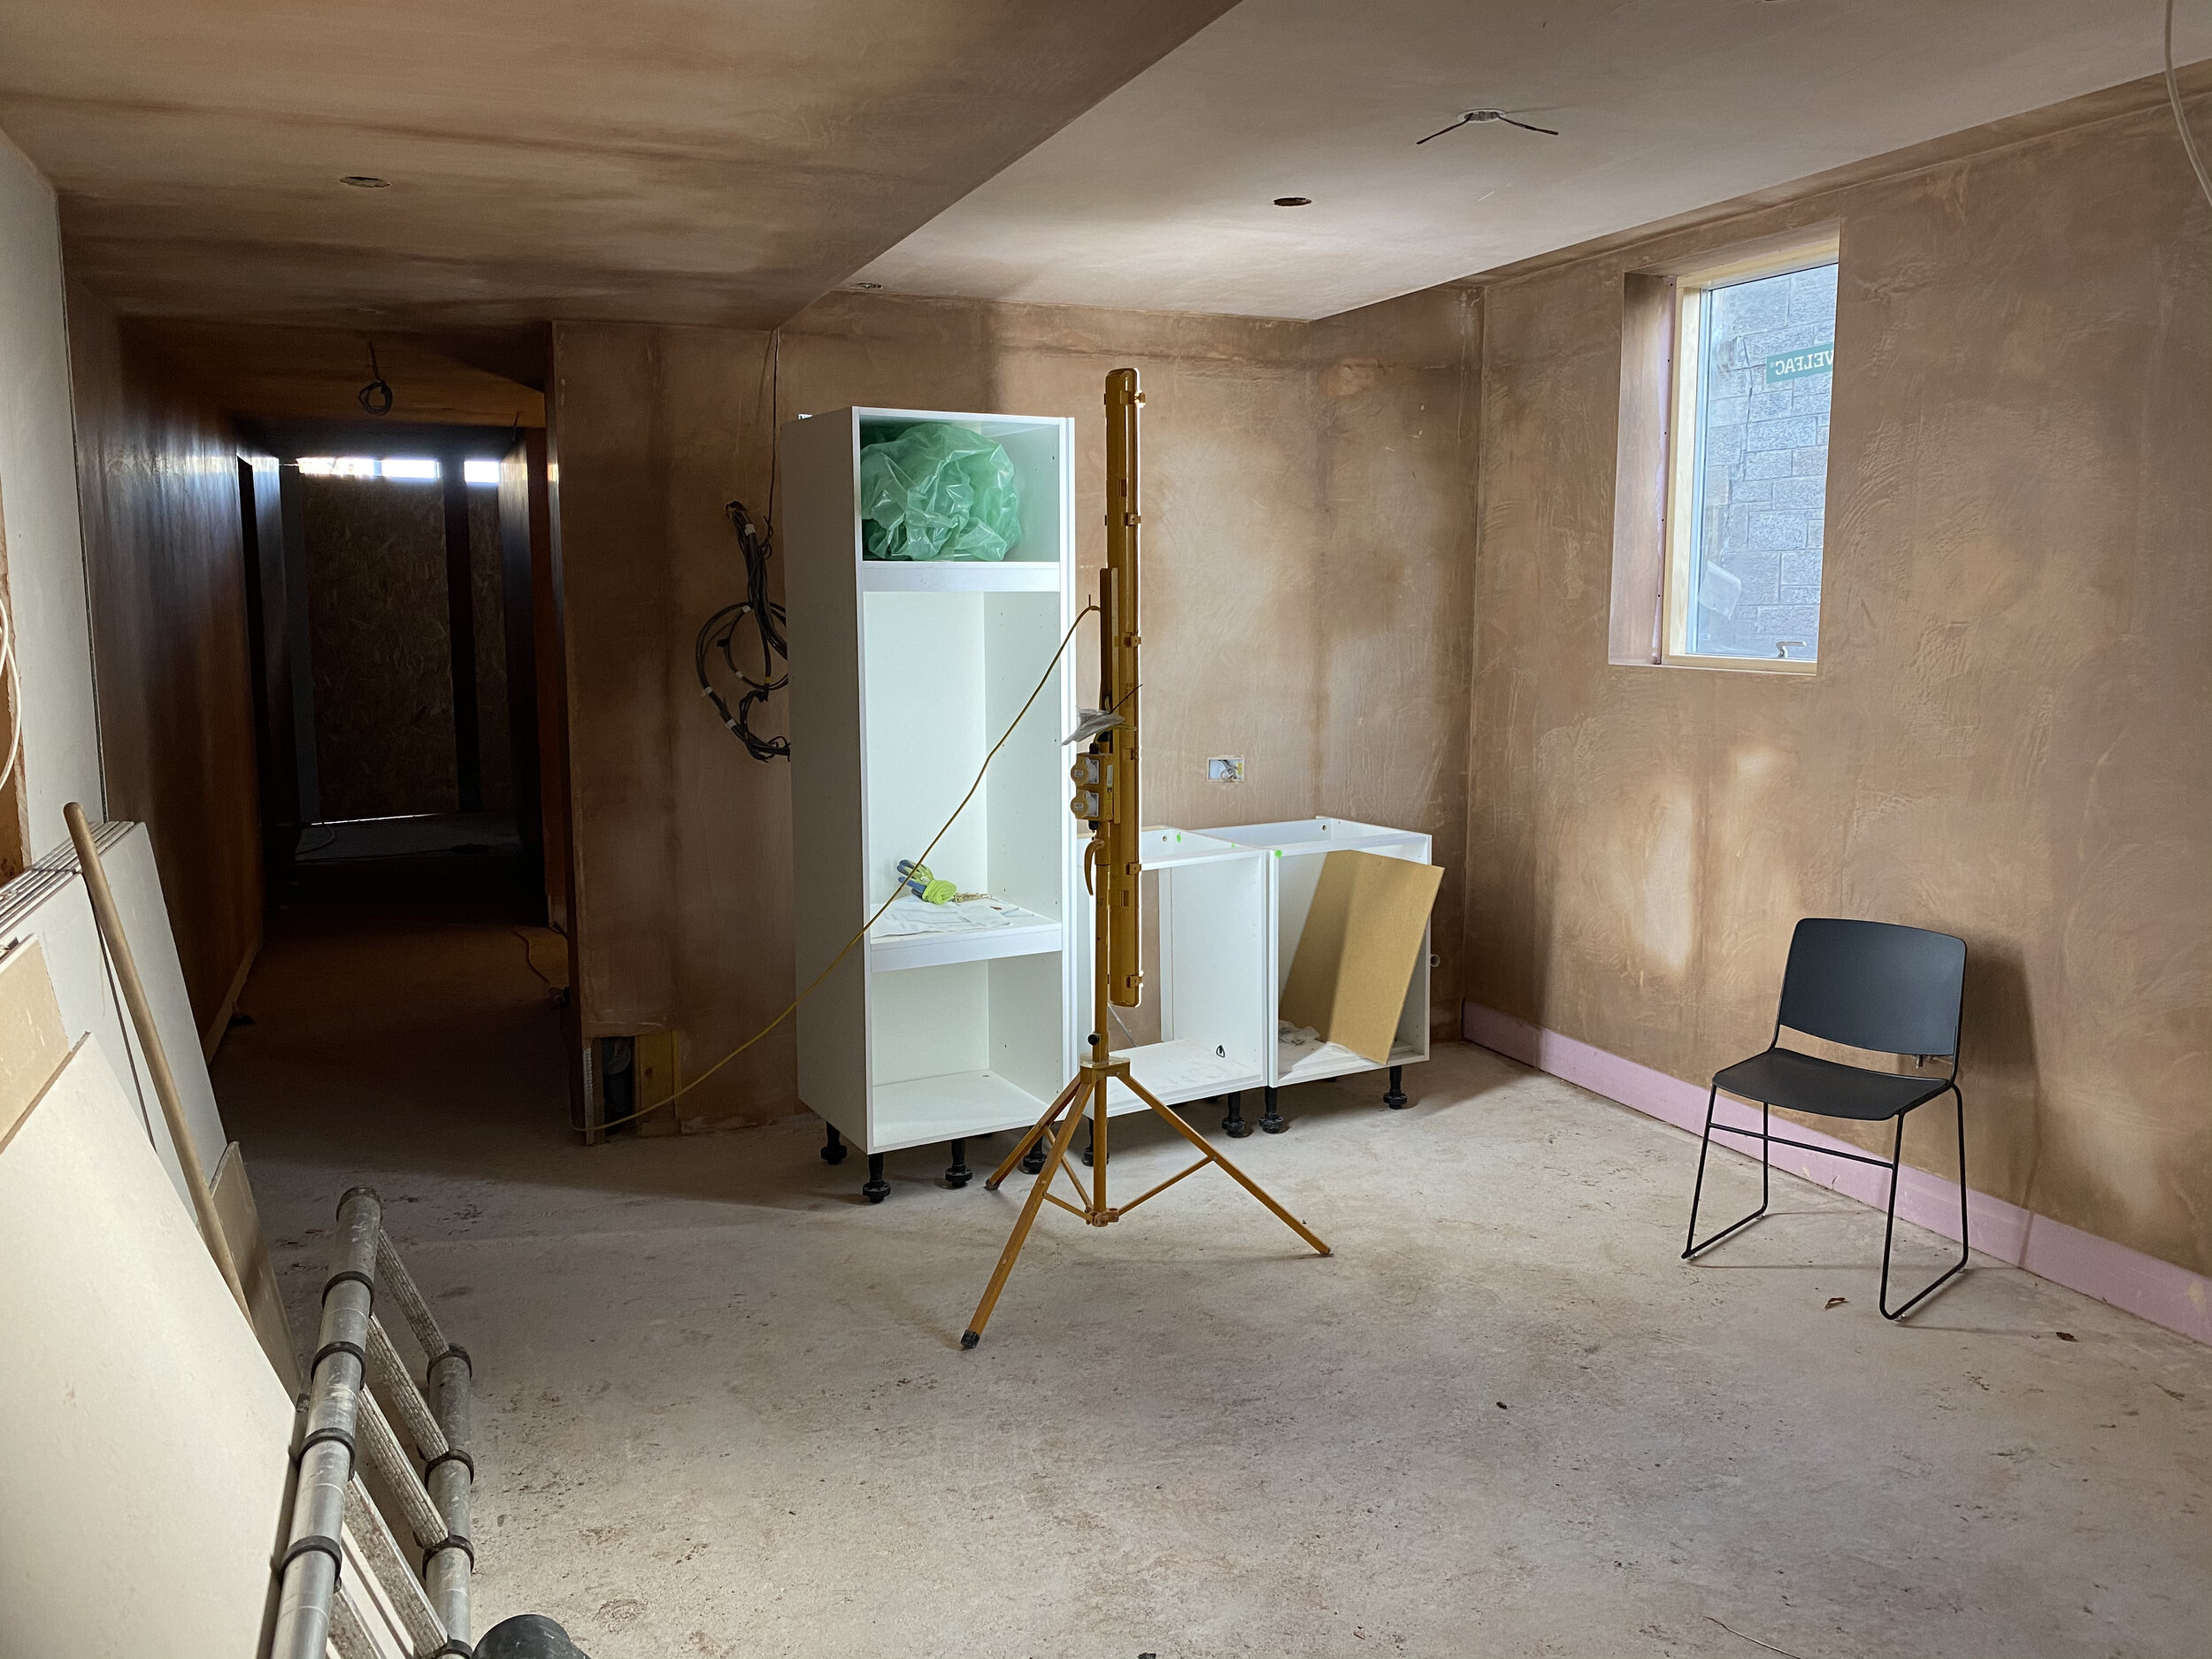 The kitchen units in the plastered extension